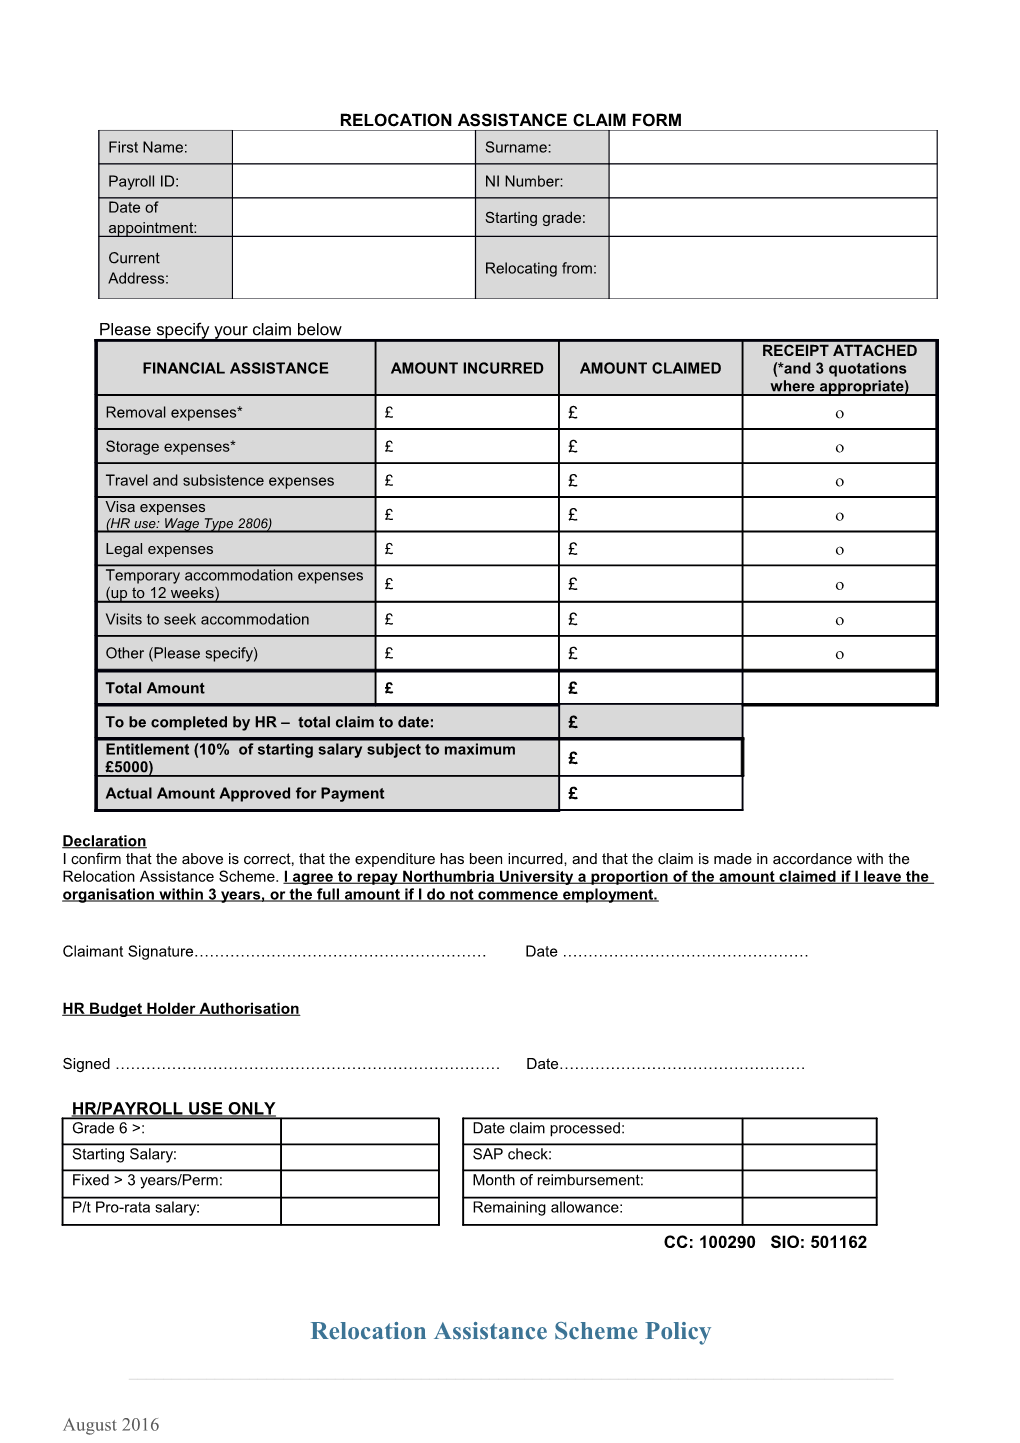 Relocation Assistance Claim Form s1